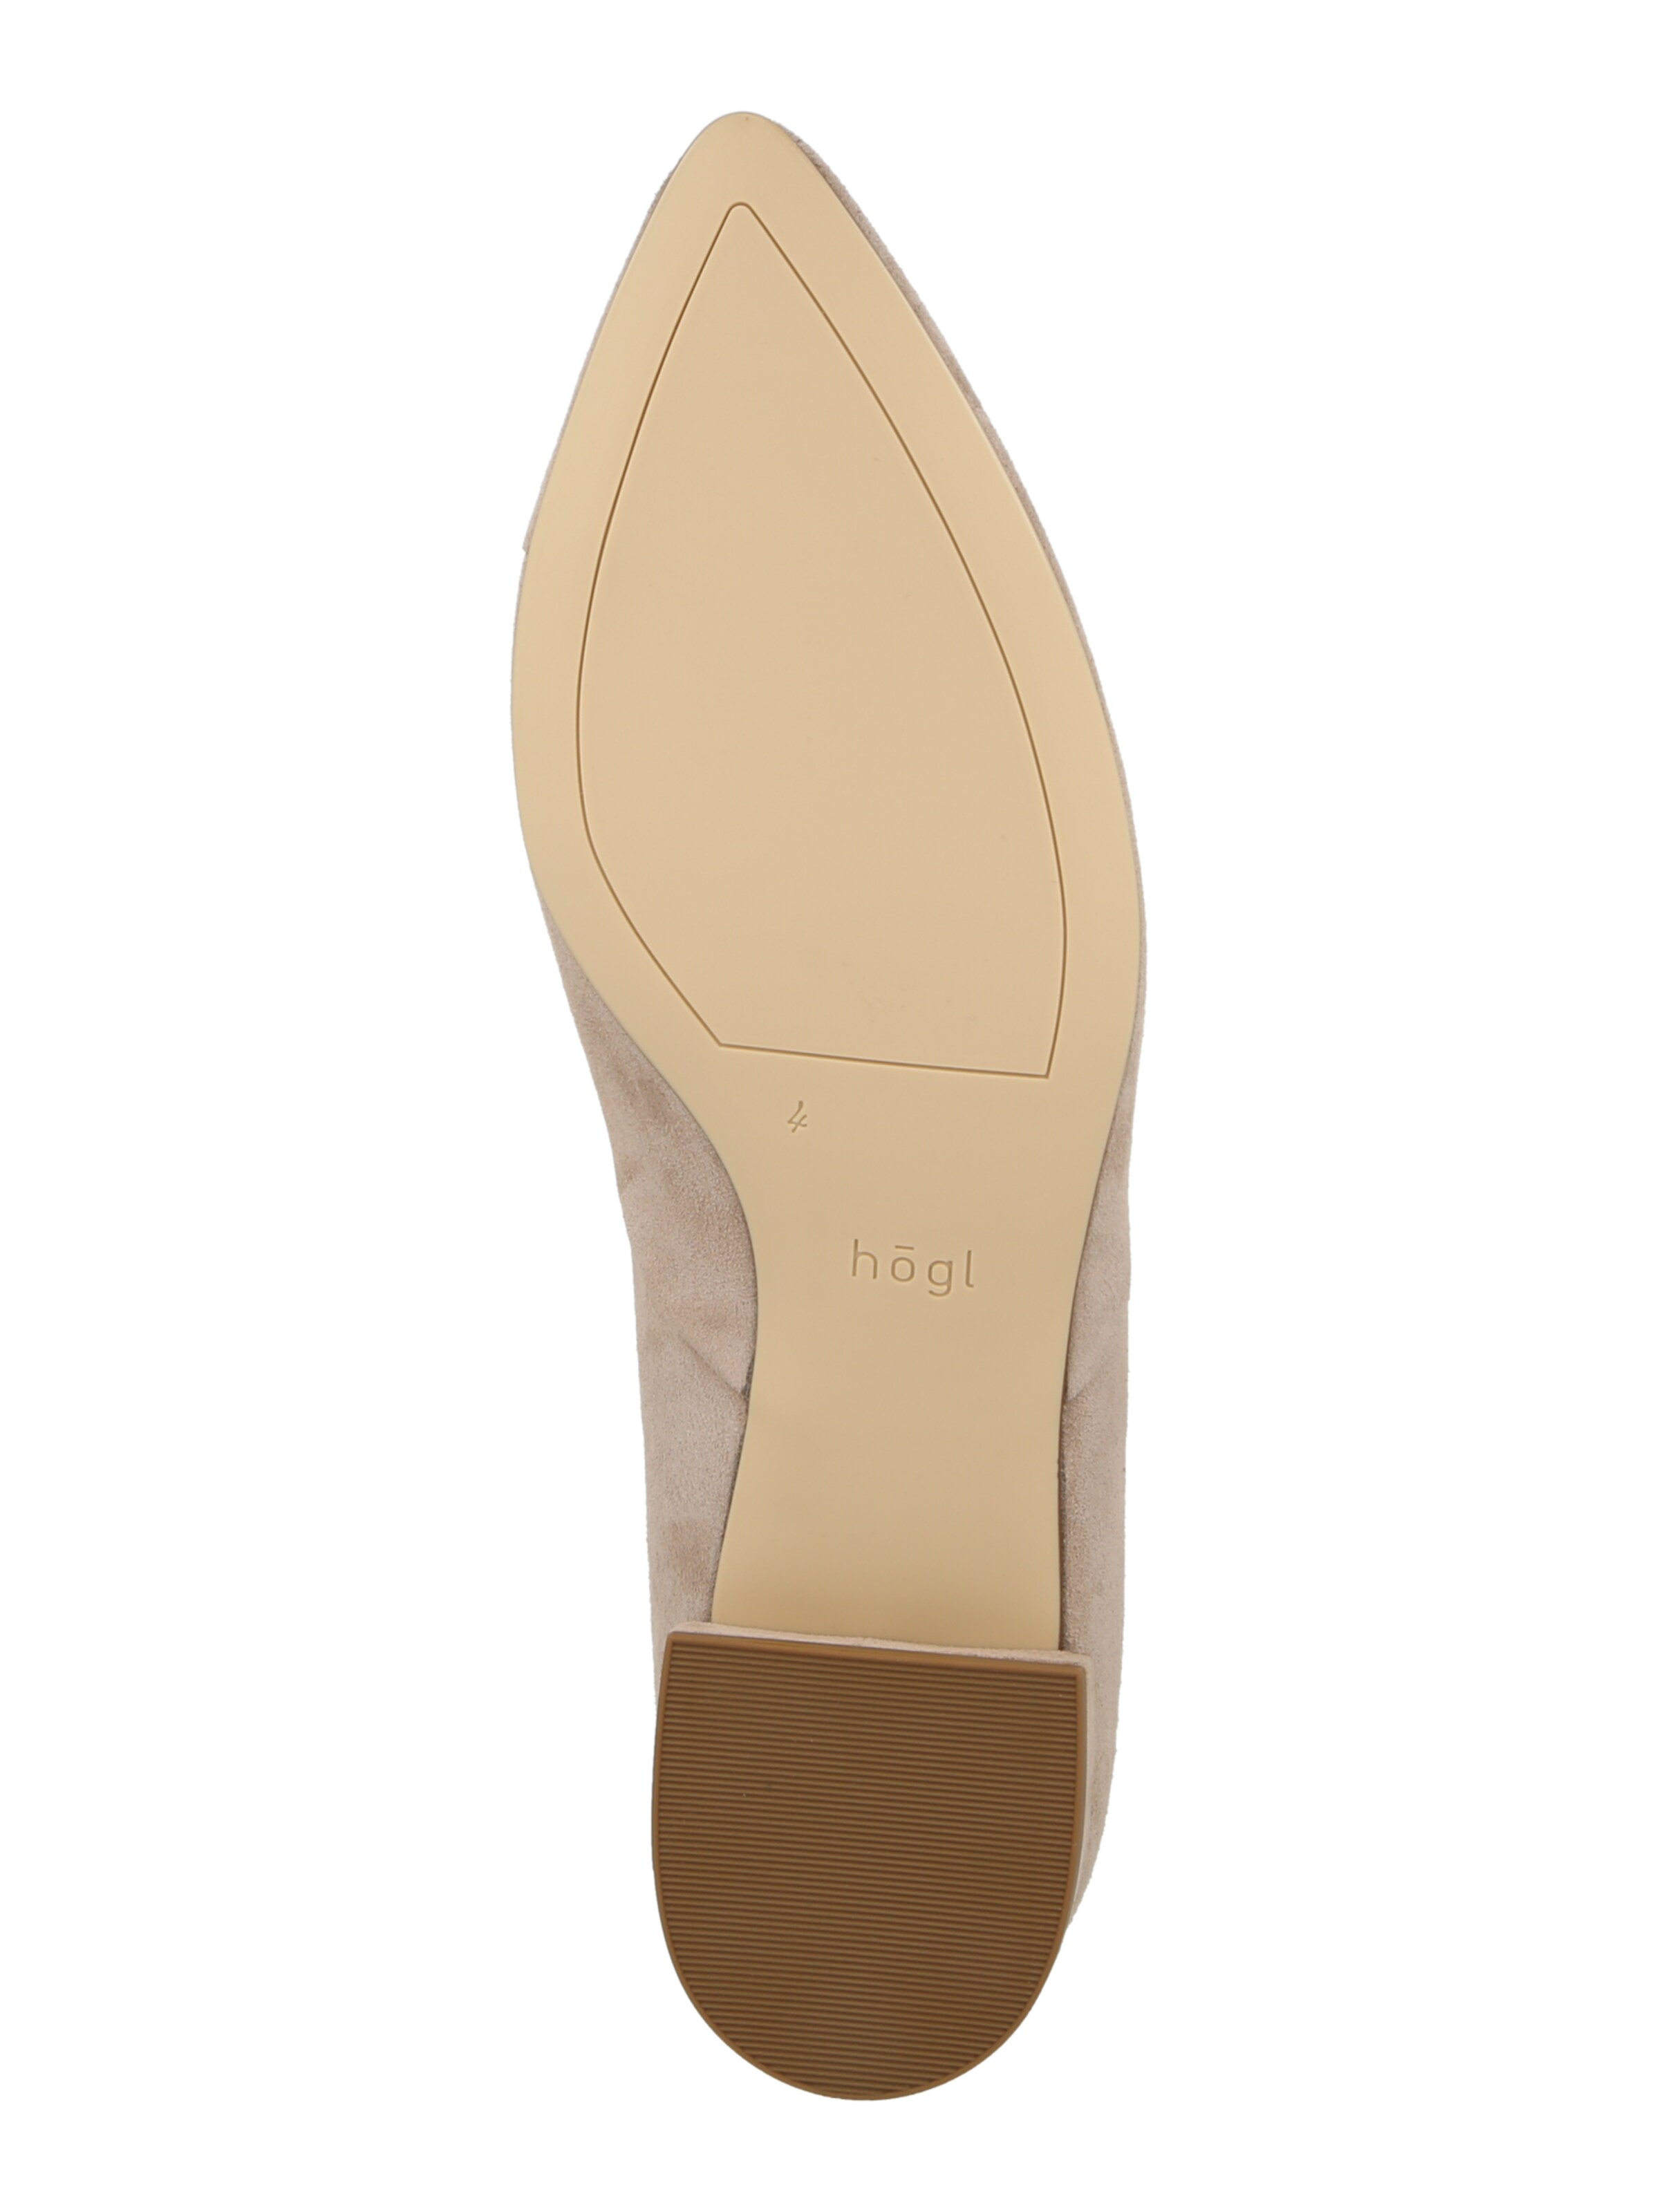 Occasions spéciales Chaussure basse Slimly Högl en Taupe 